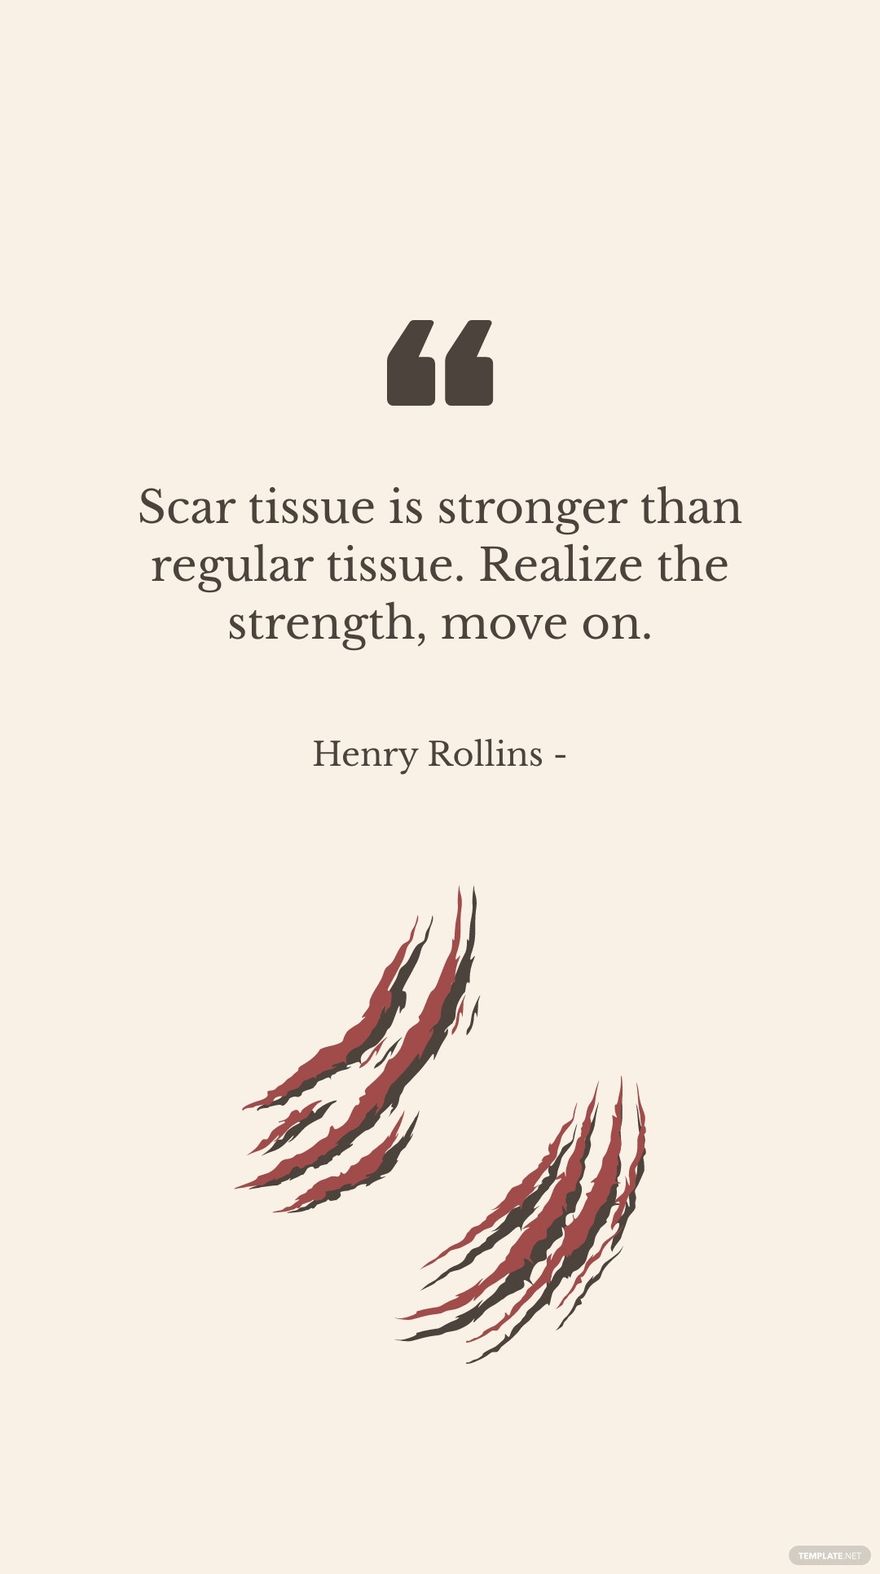 Henry Rollins - Scar tissue is stronger than regular tissue. Realize the strength, move on.